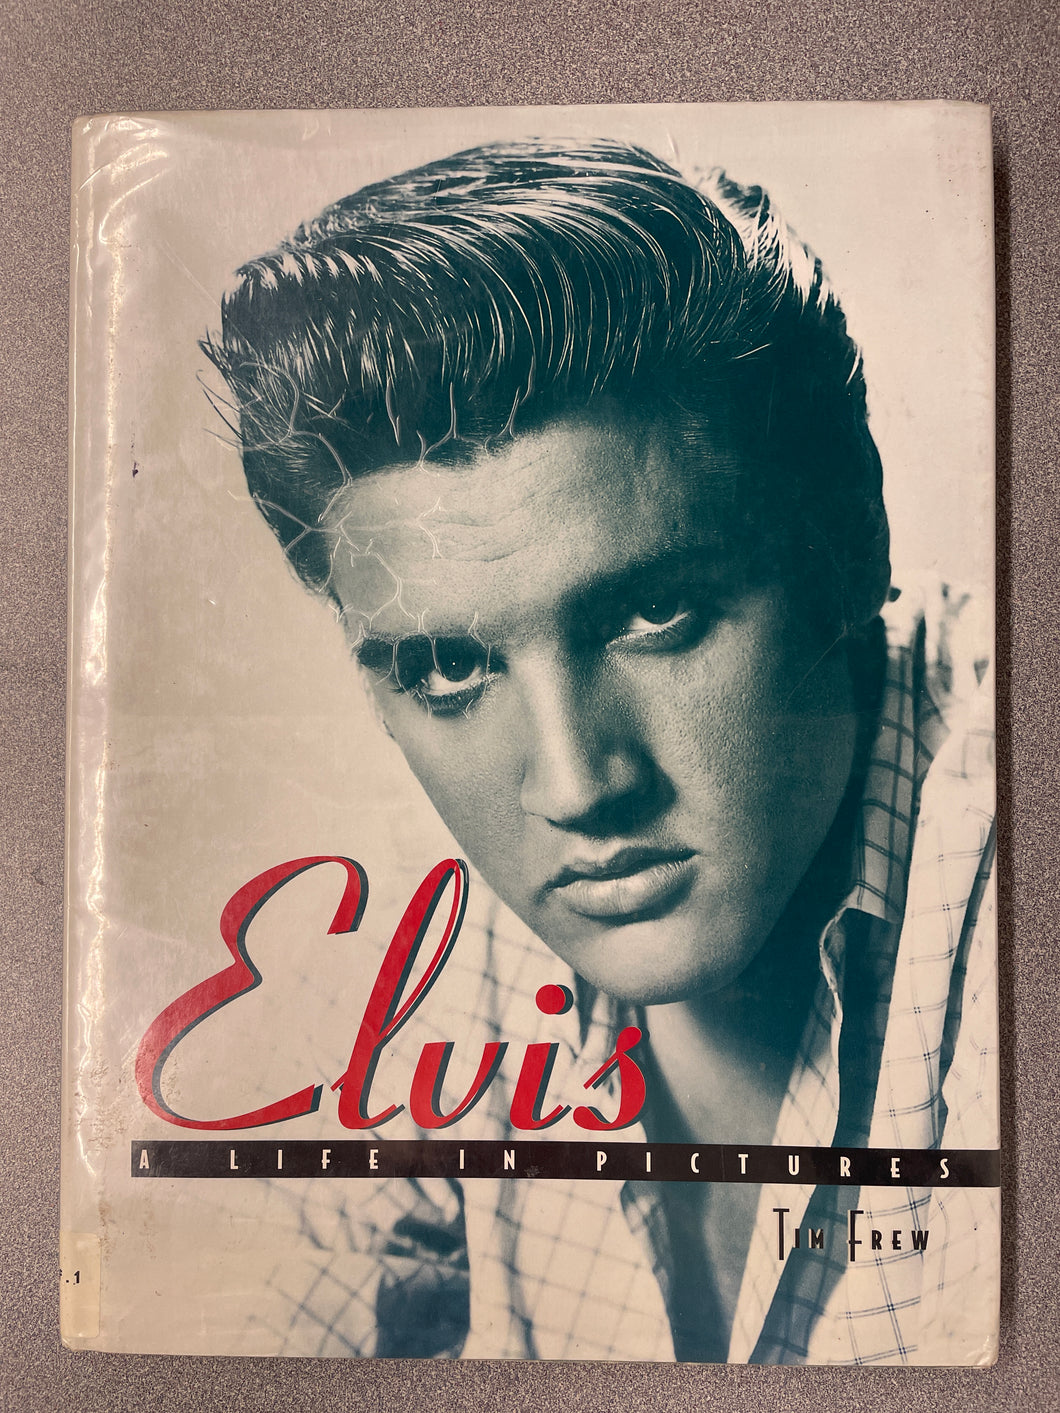 Elvis: A Life in Pictures, Frew, Tim [1997] EP 12/23